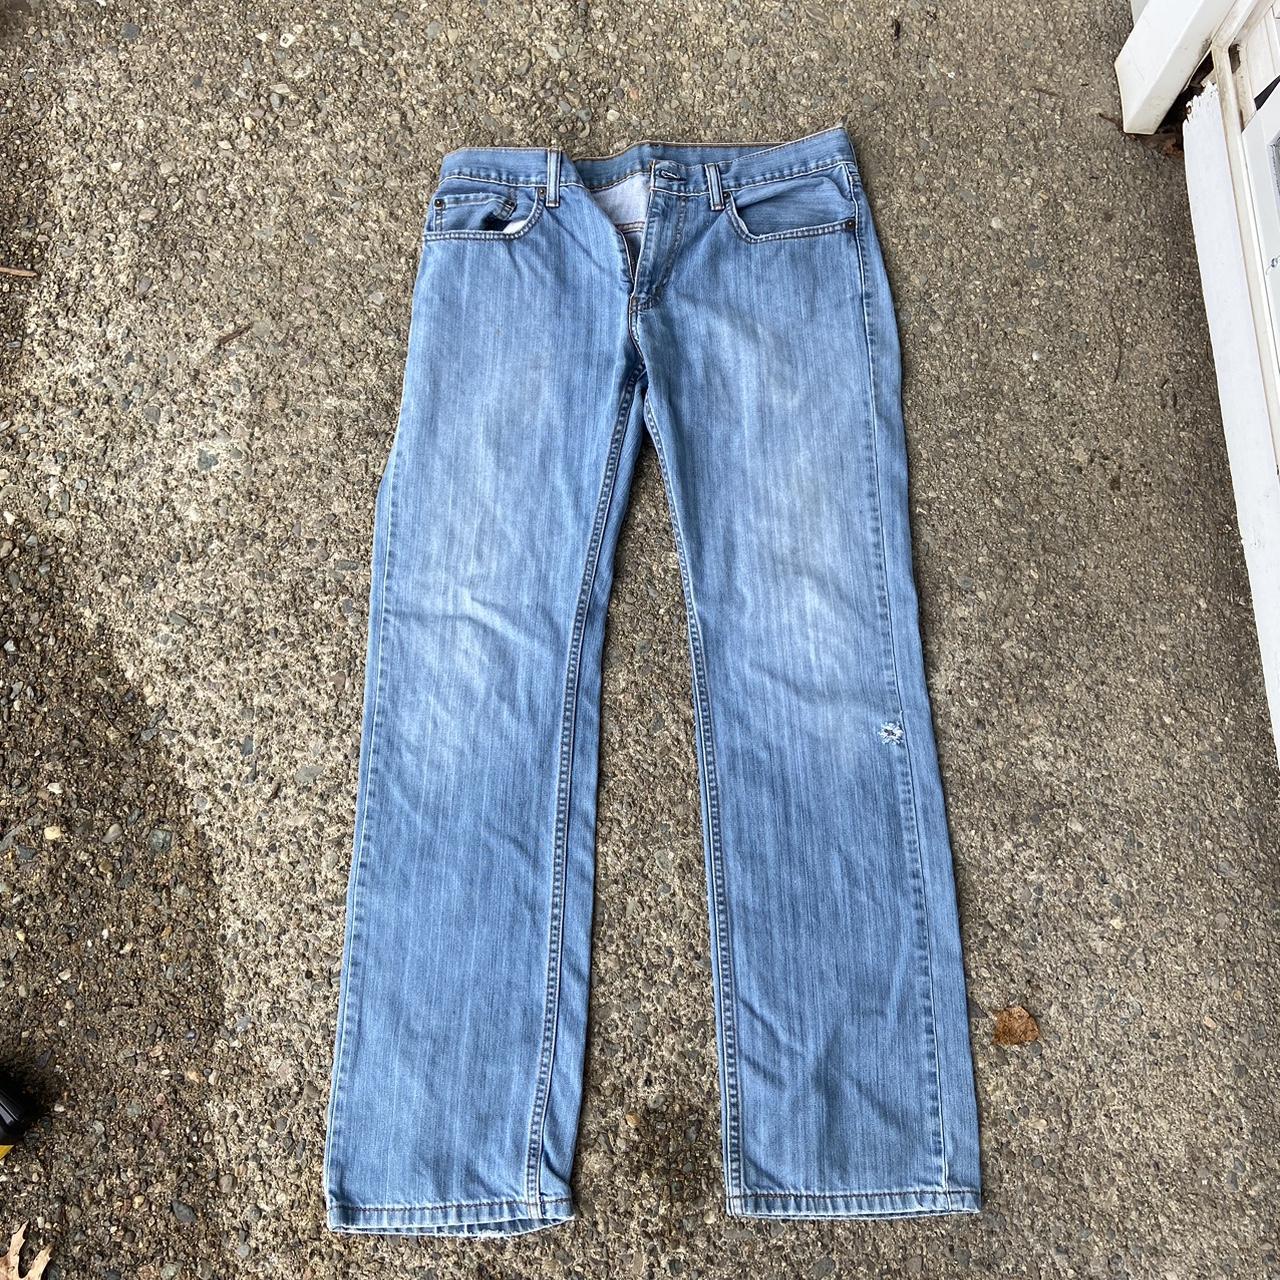 Vintage Levi’s 559 Relaxed Straight Beautiful wash... - Depop